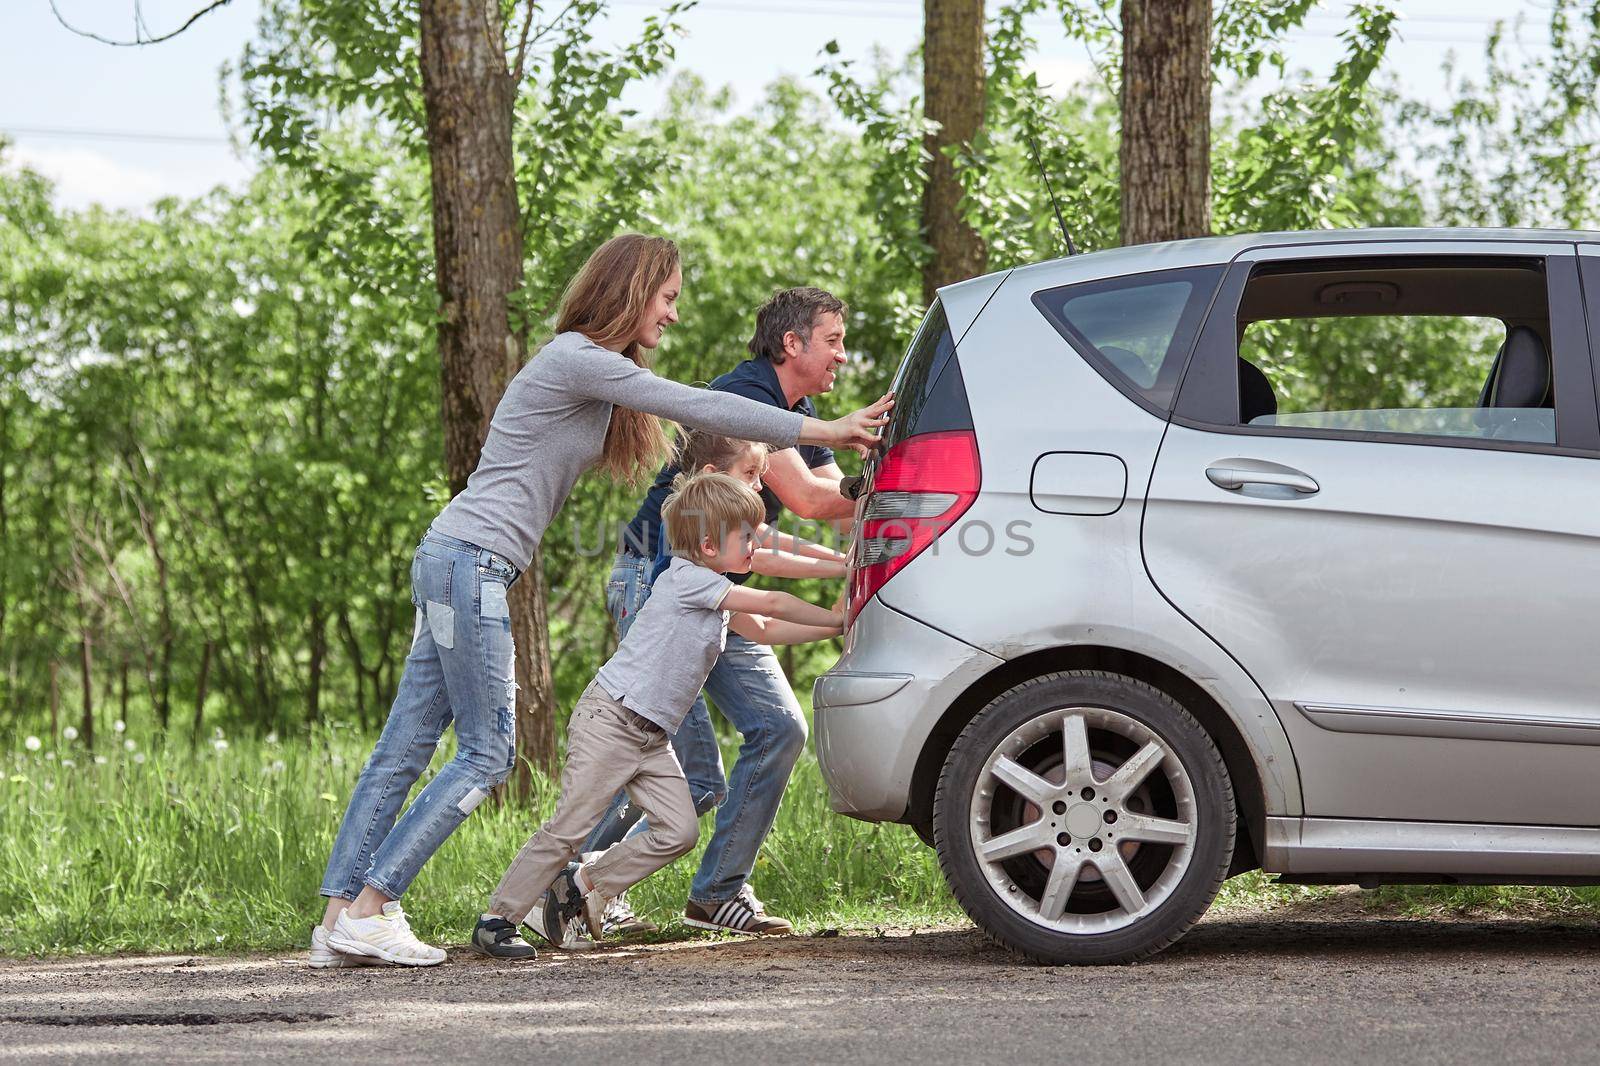 family with children pushing a faulty car by SmartPhotoLab